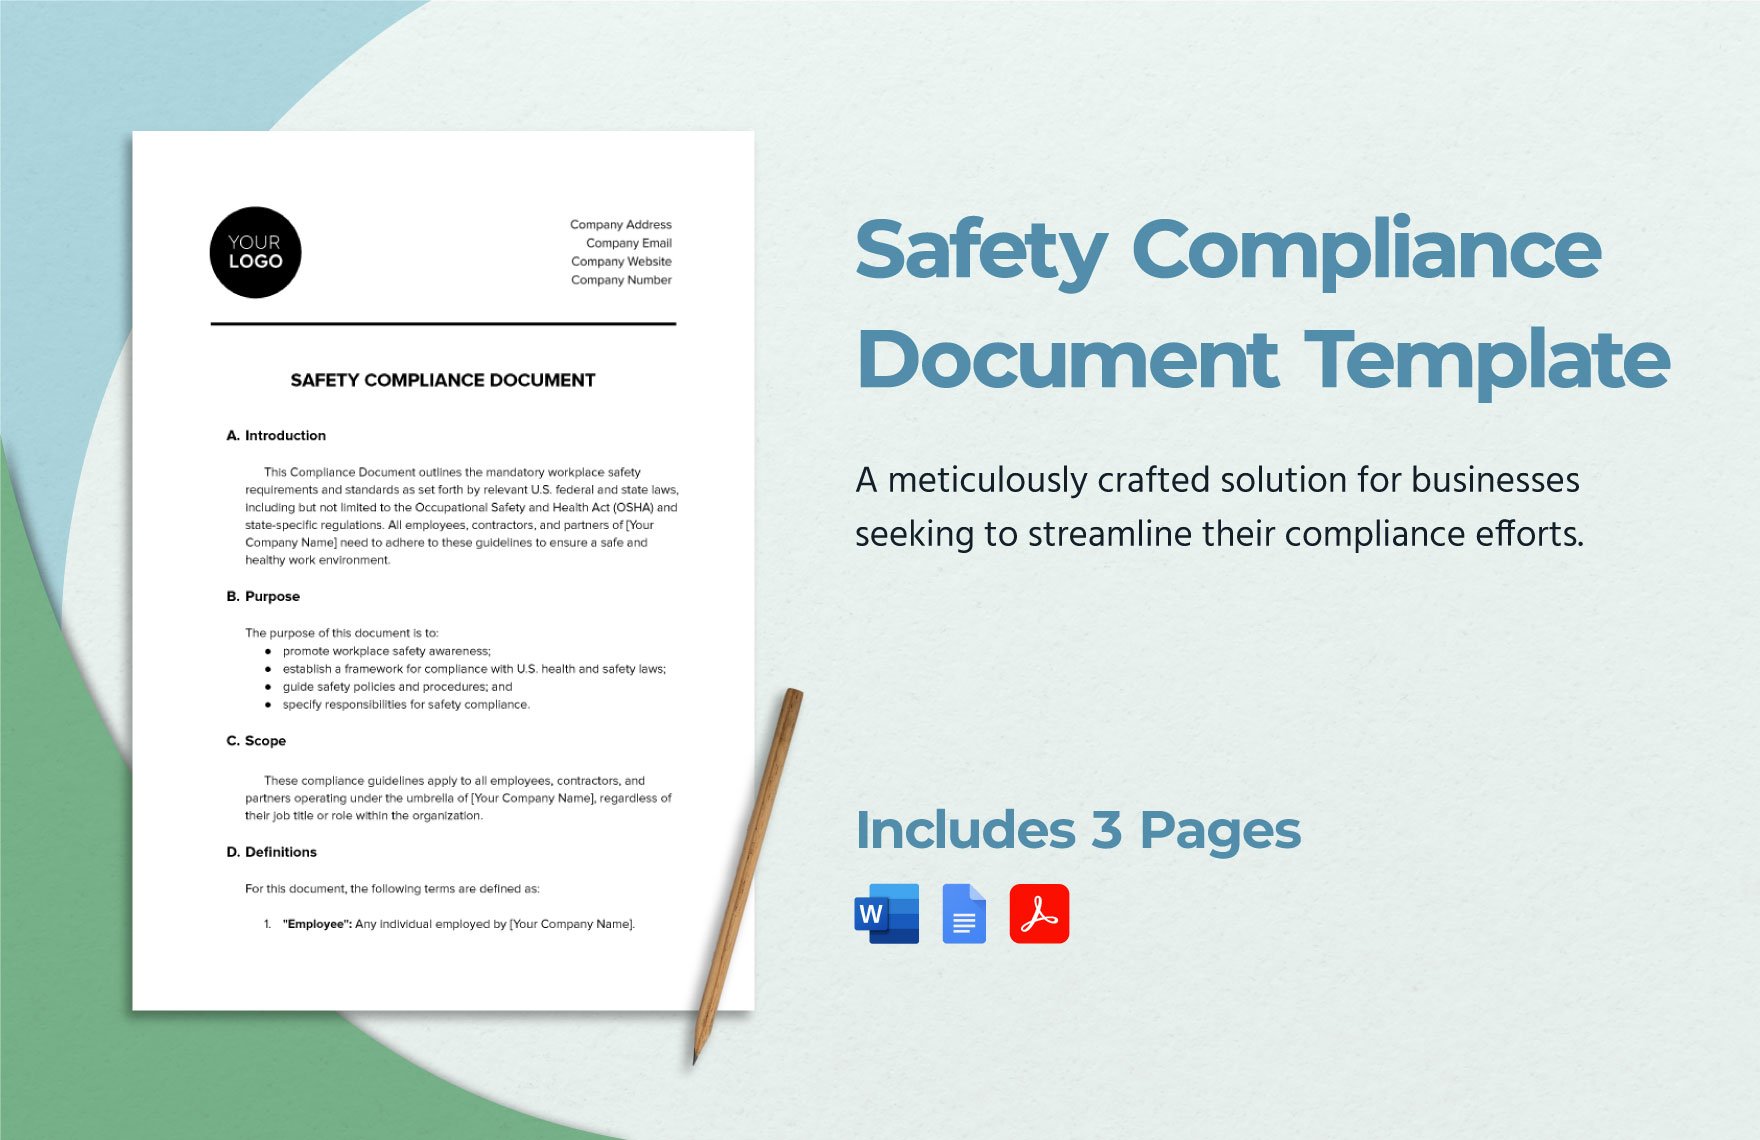 Safety Compliance Document Template in Word, Google Docs, PDF